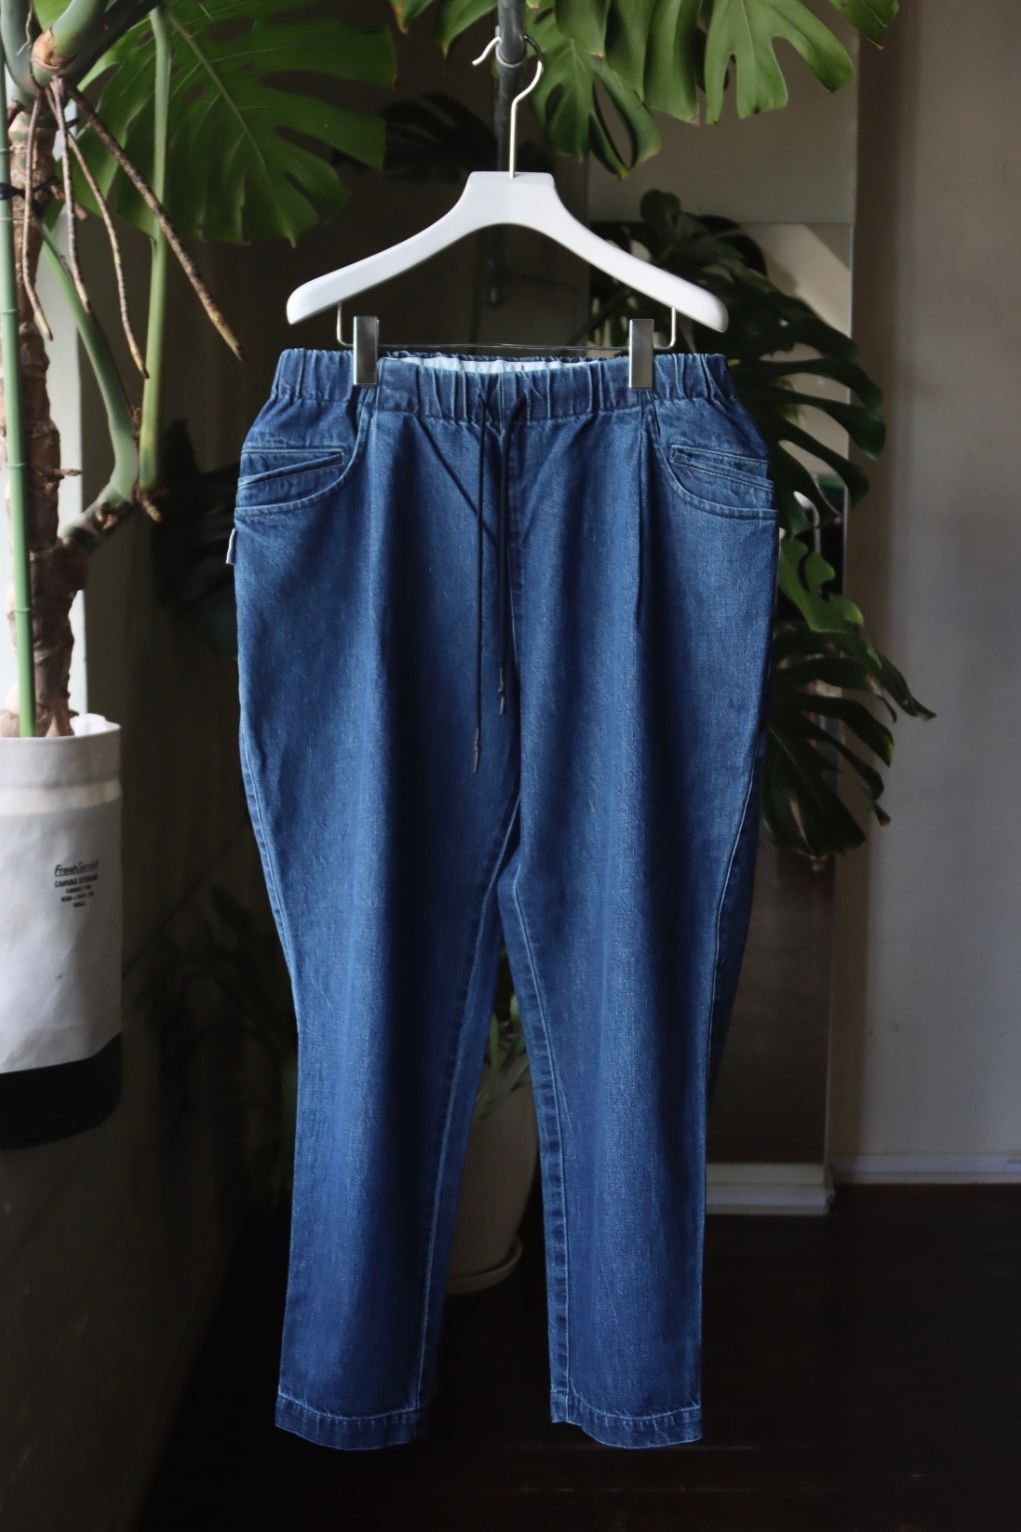 sfc 23ss WIDE TAPERED EASY PANTS